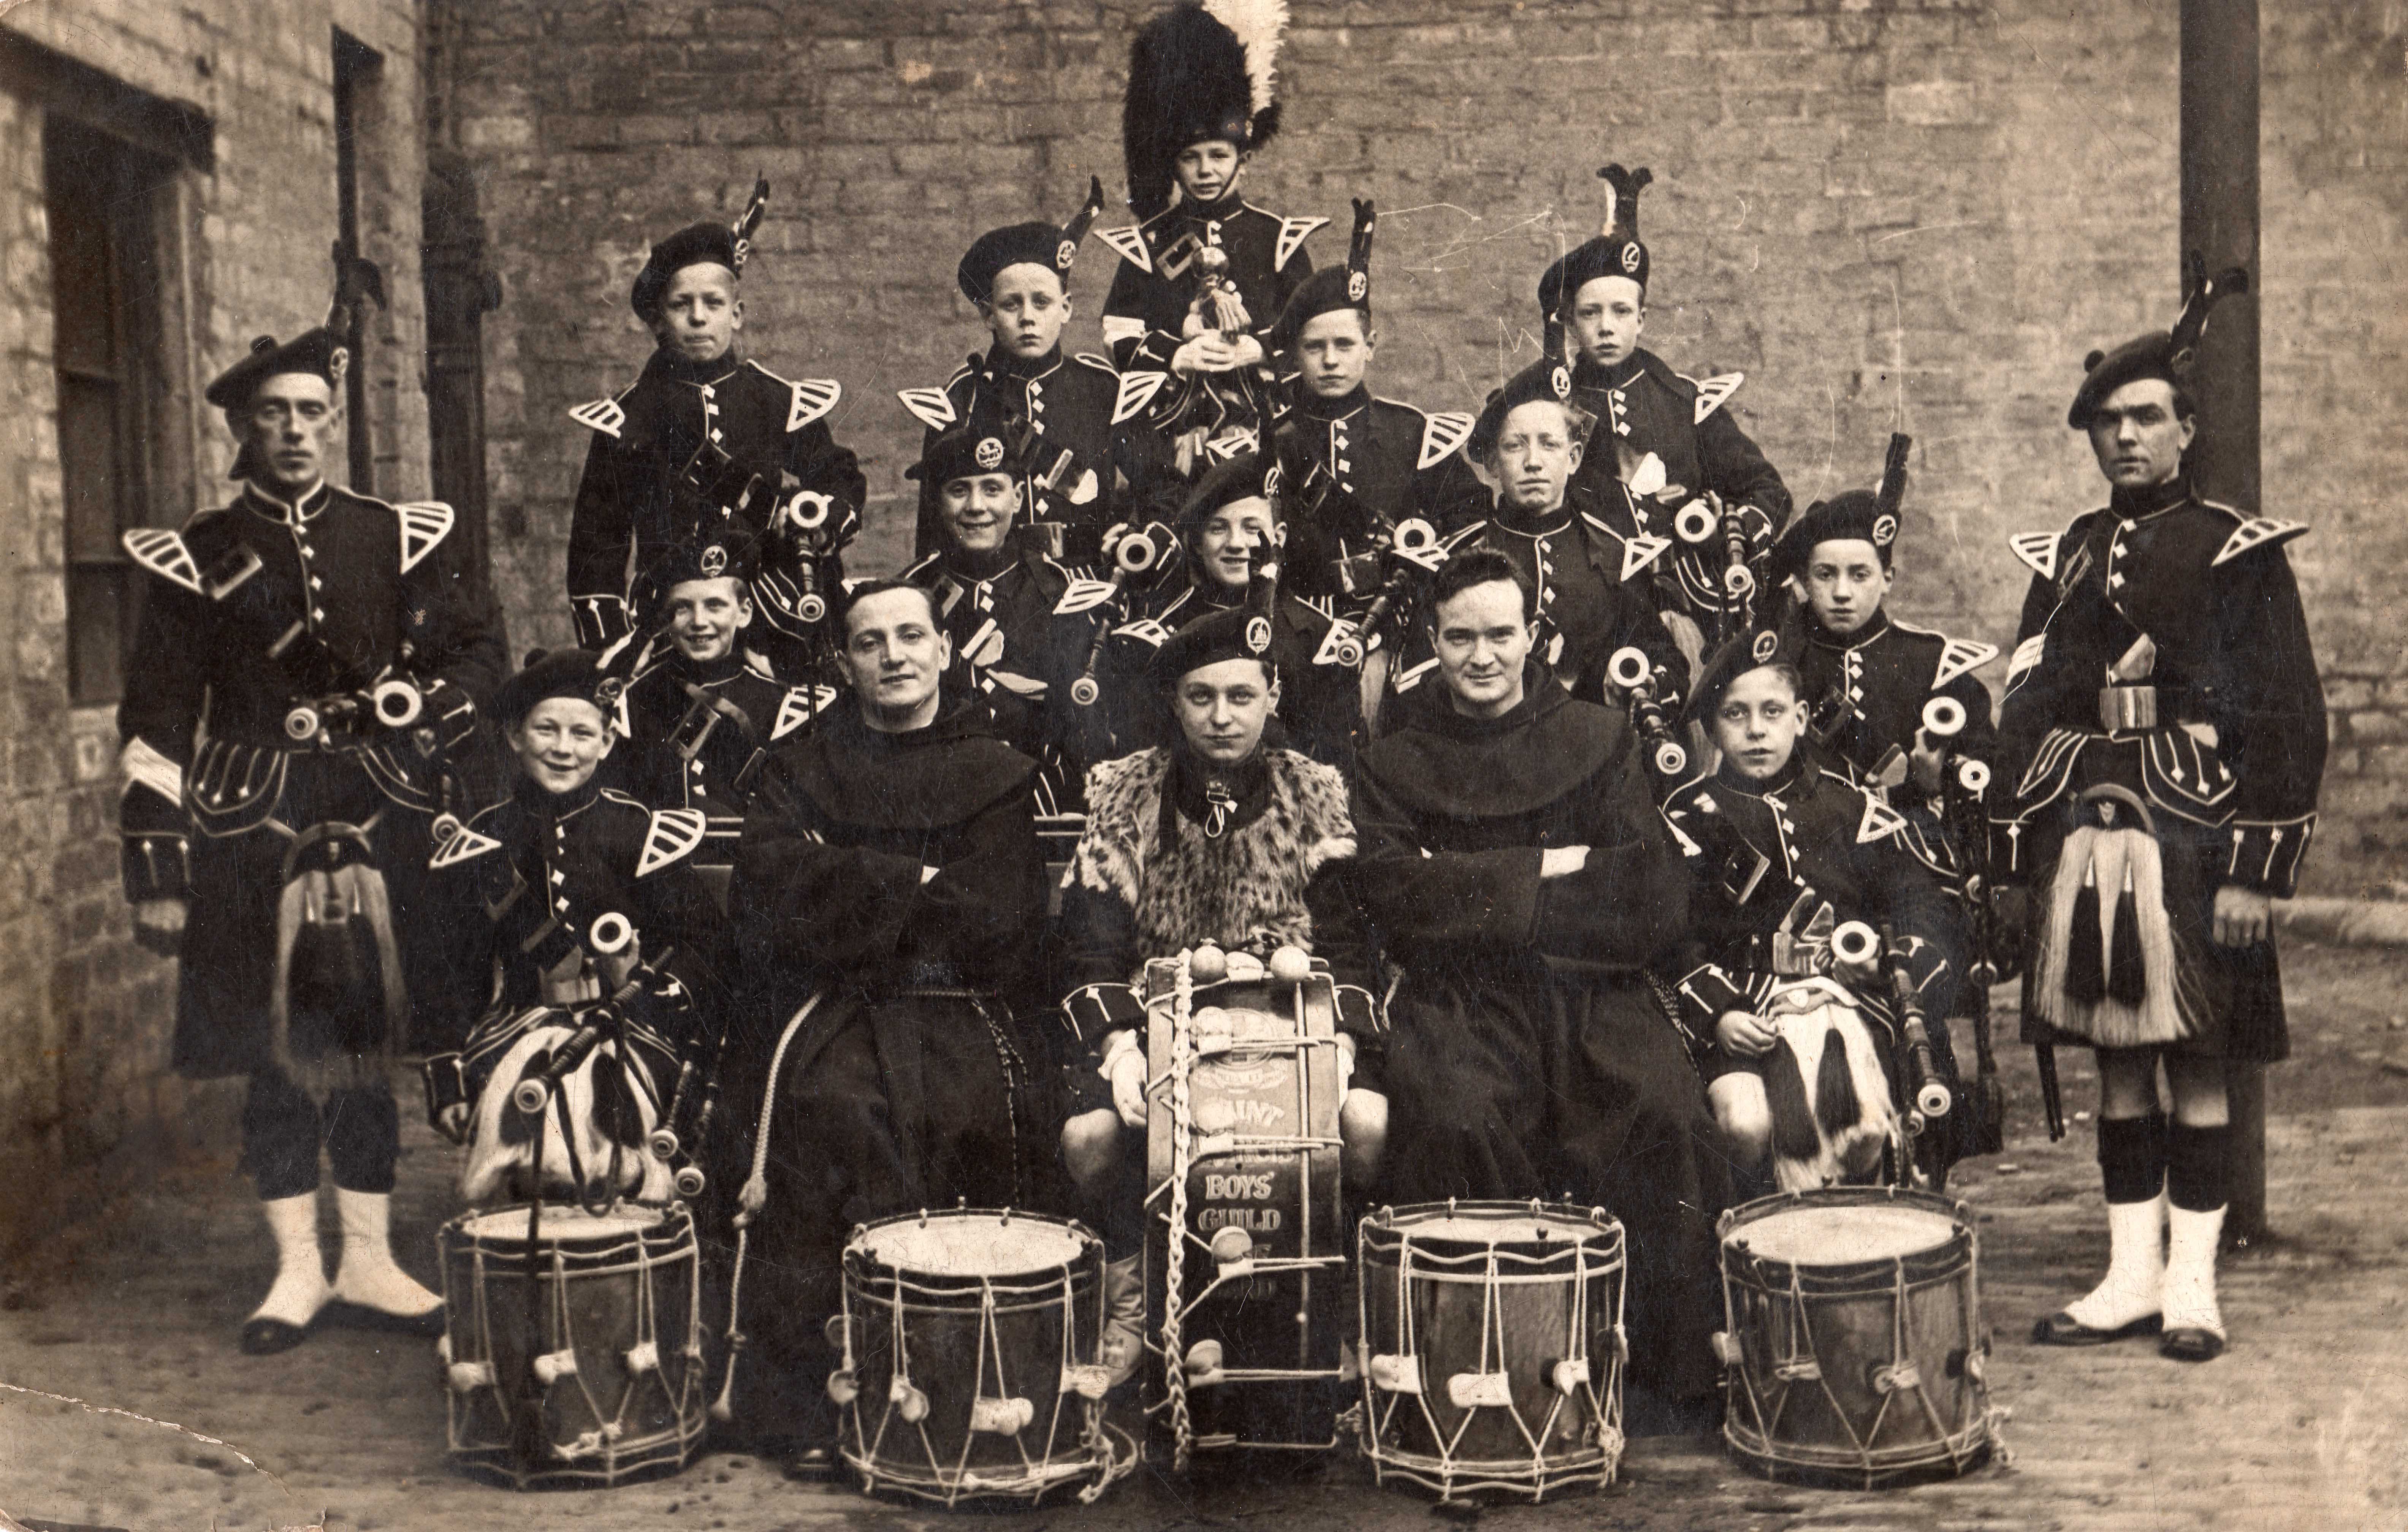 St. Francis Pipe Band, mid-1920s.